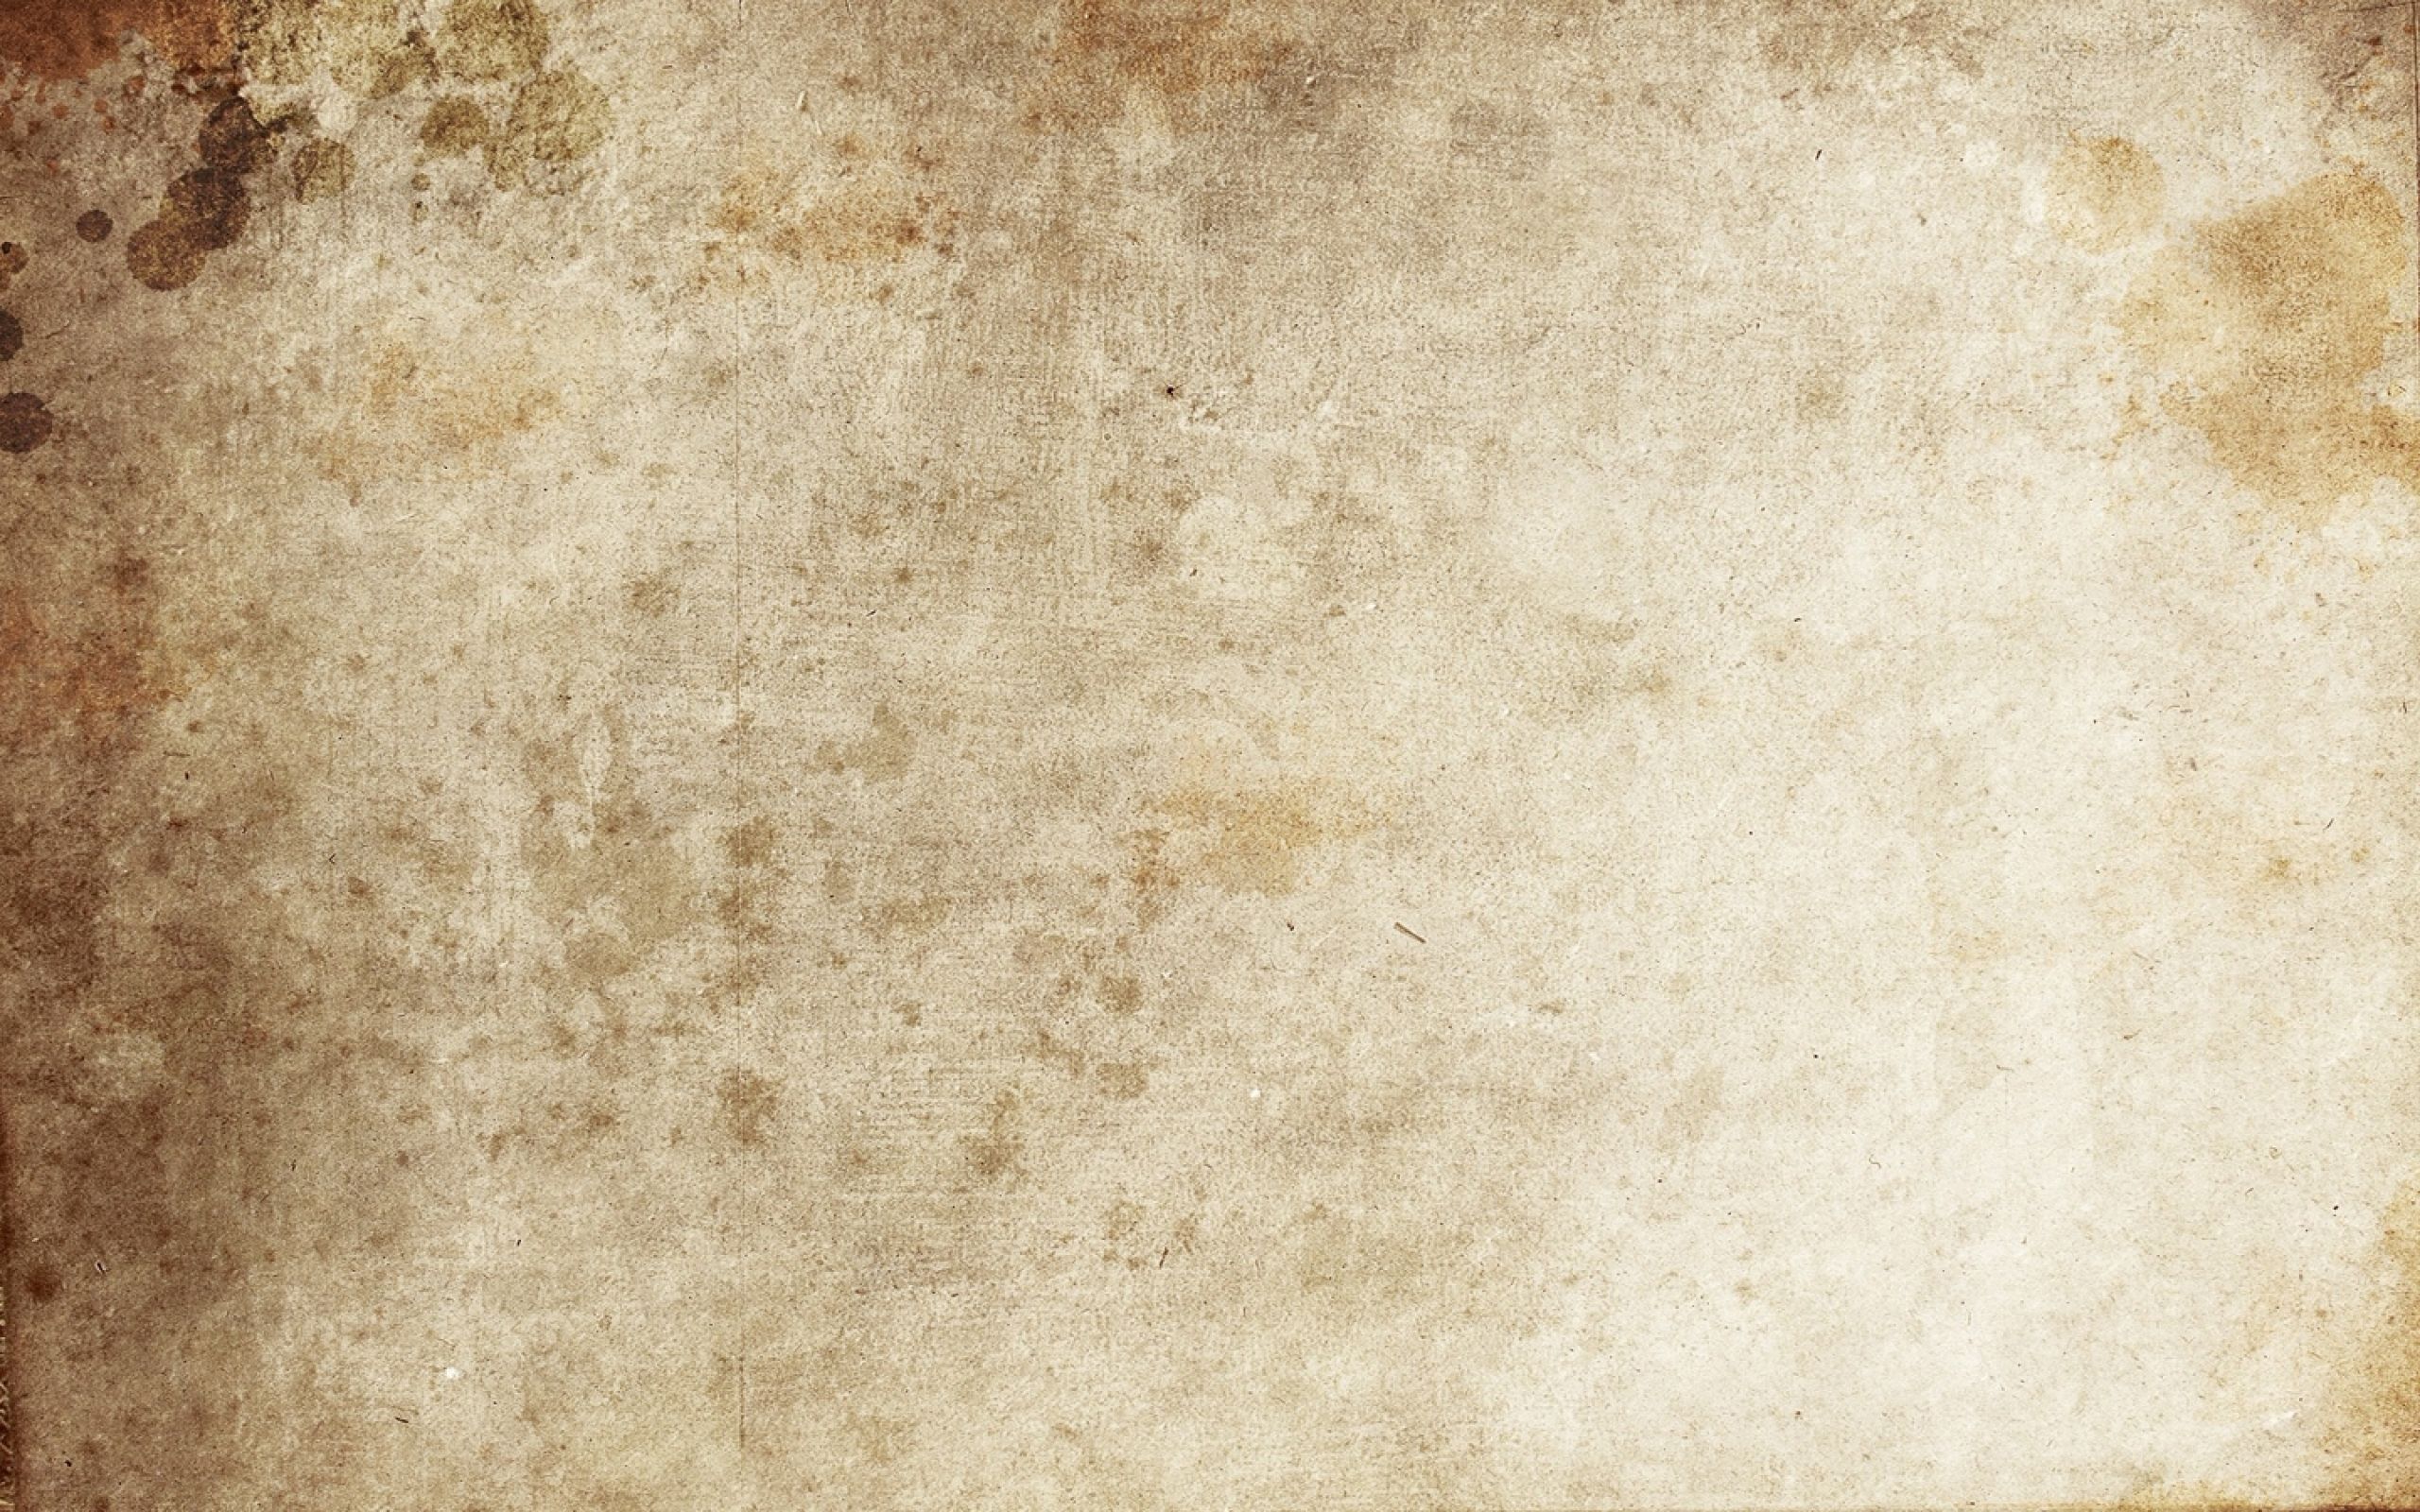 Vintage Looking Wallpaper - Grunge Texture Free High Resolution , HD Wallpaper & Backgrounds